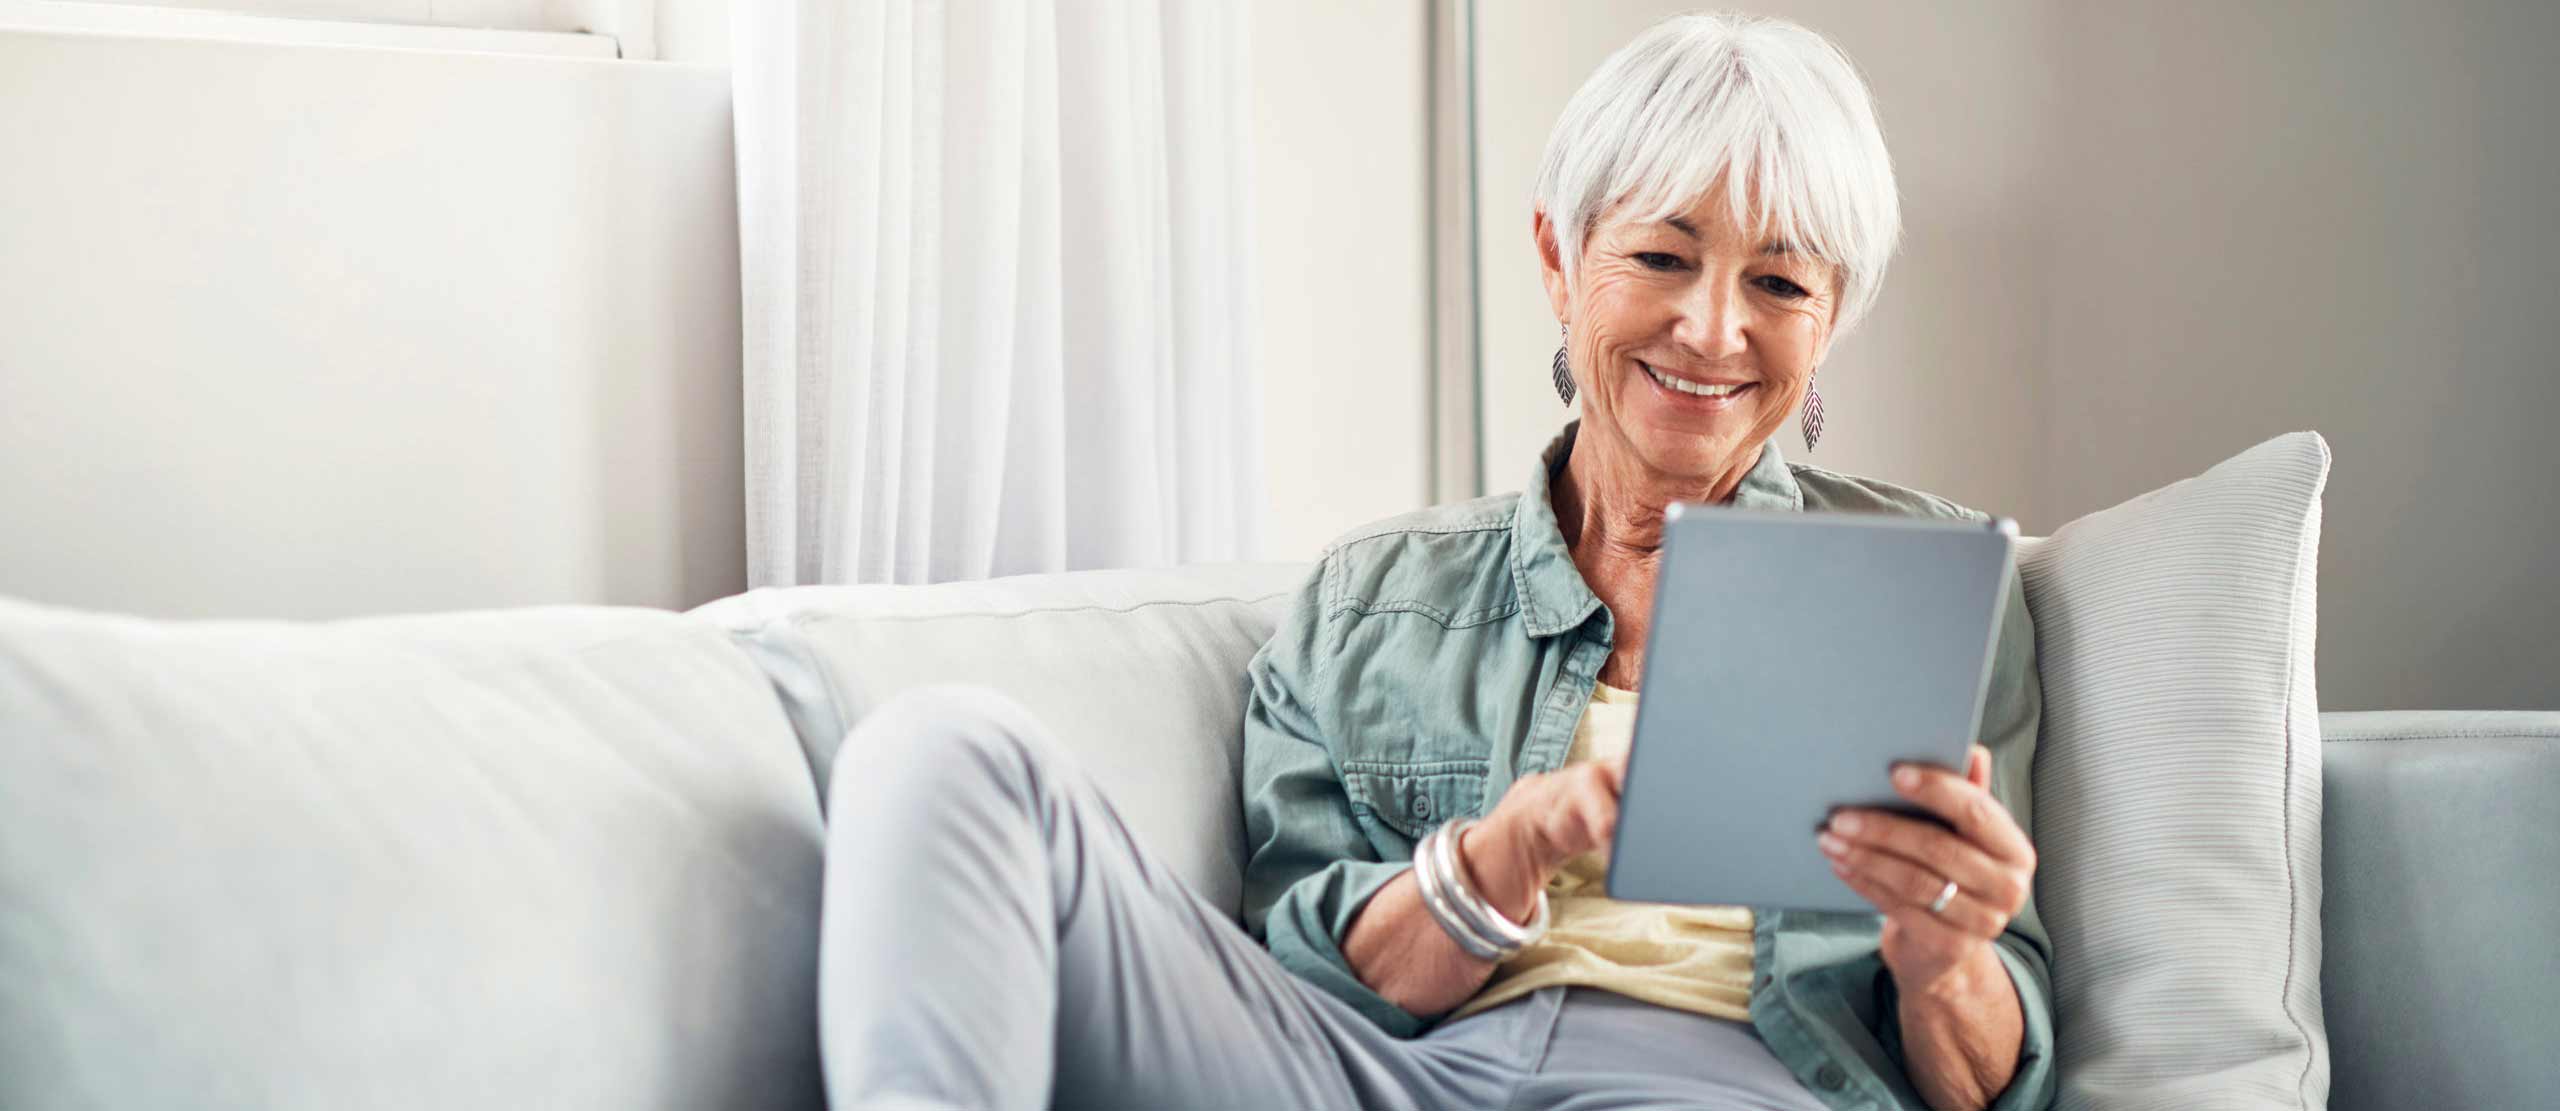 Senior woman using tablet while sitting on couch